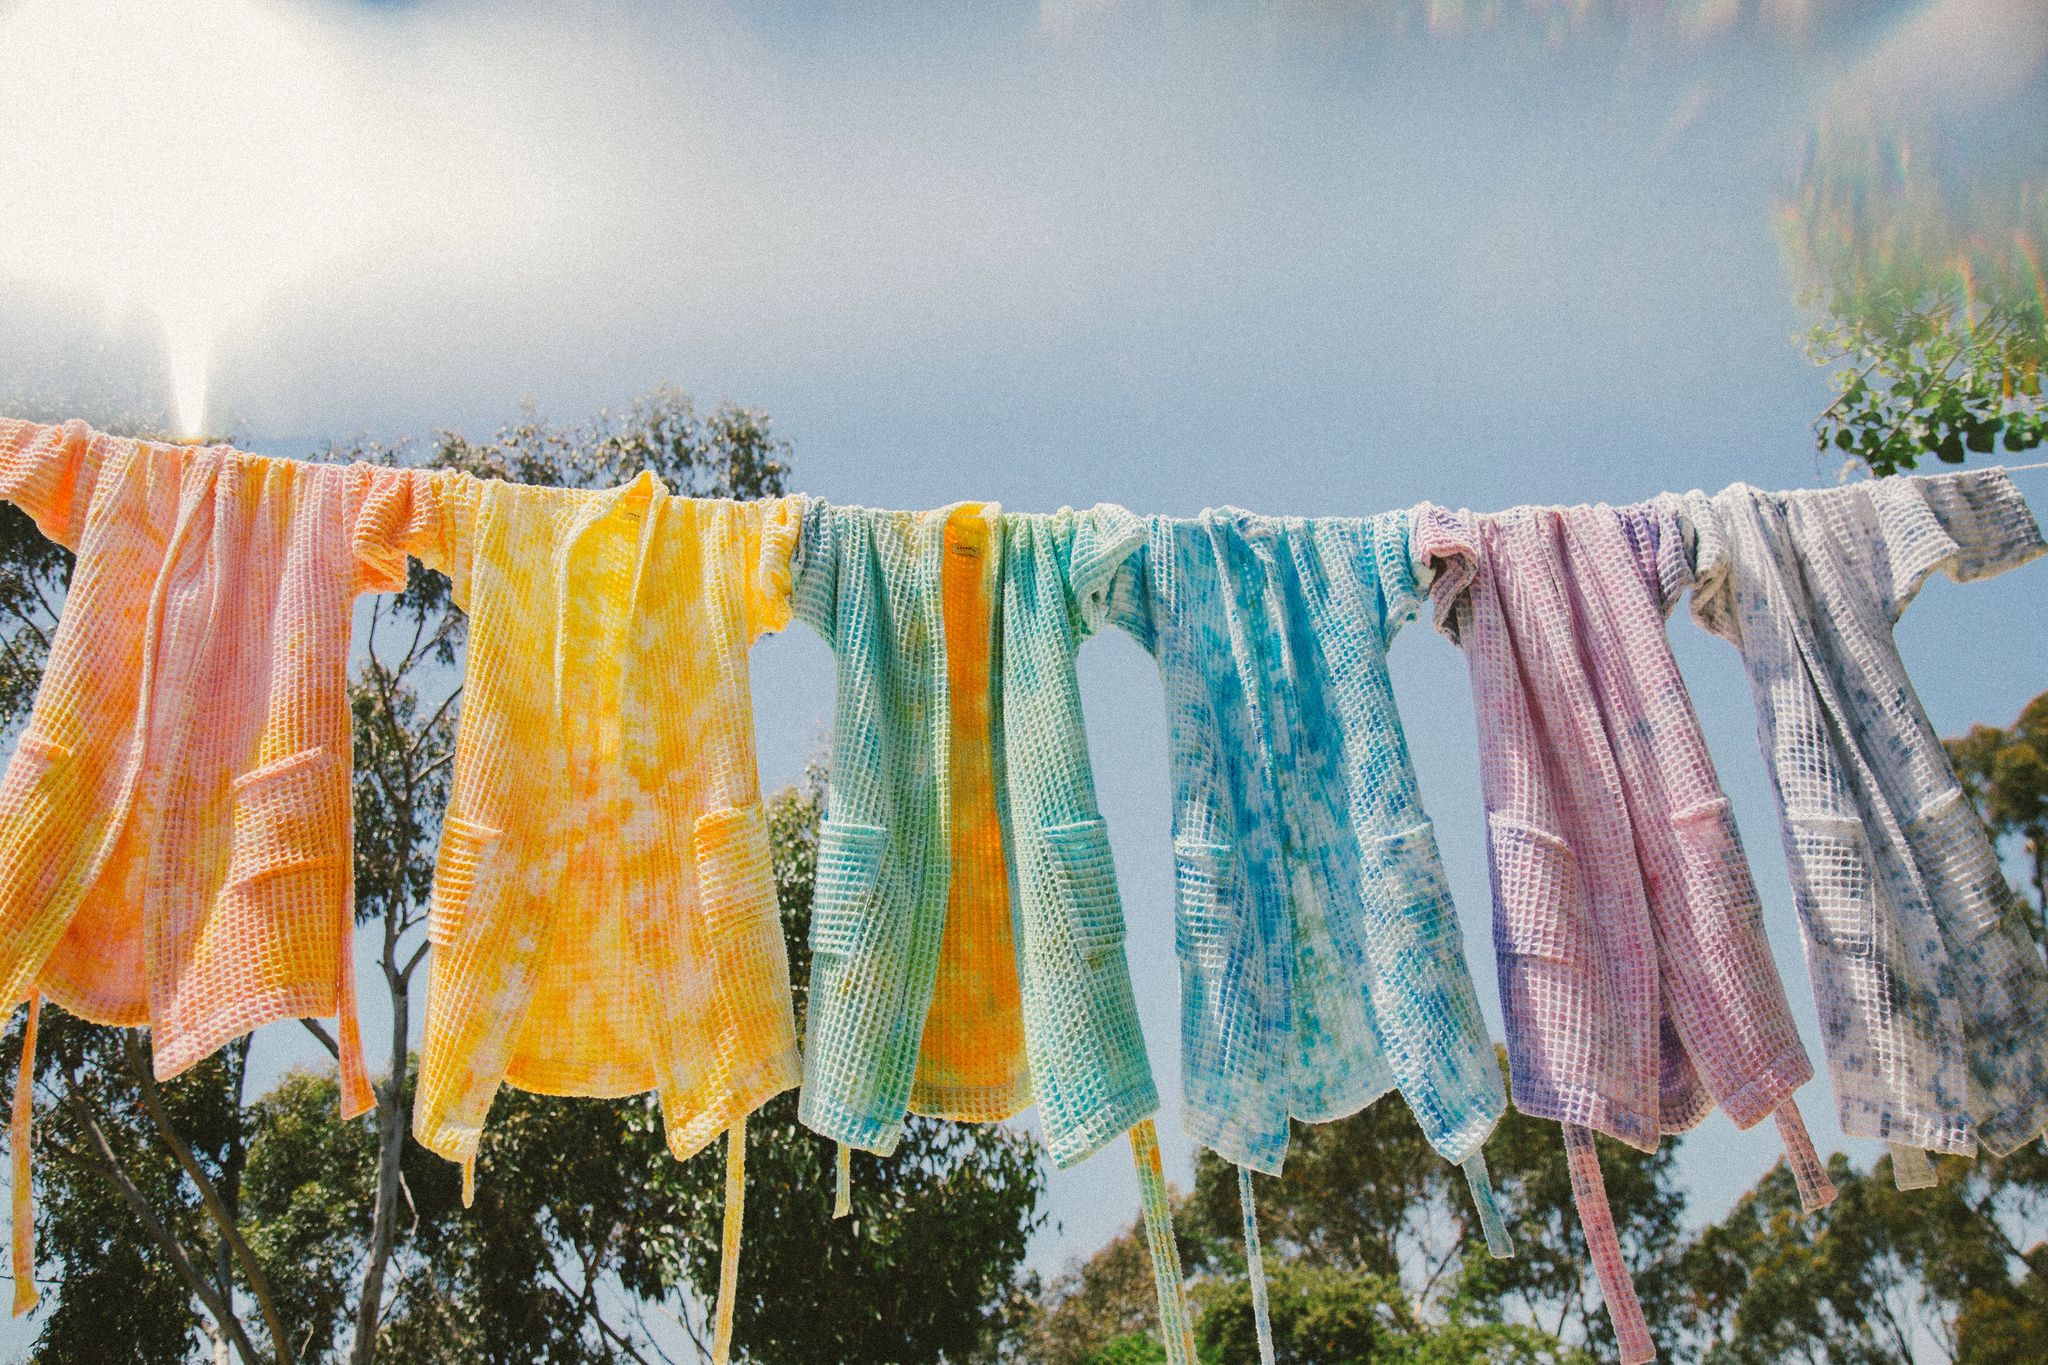 robes hanging on a clothesline